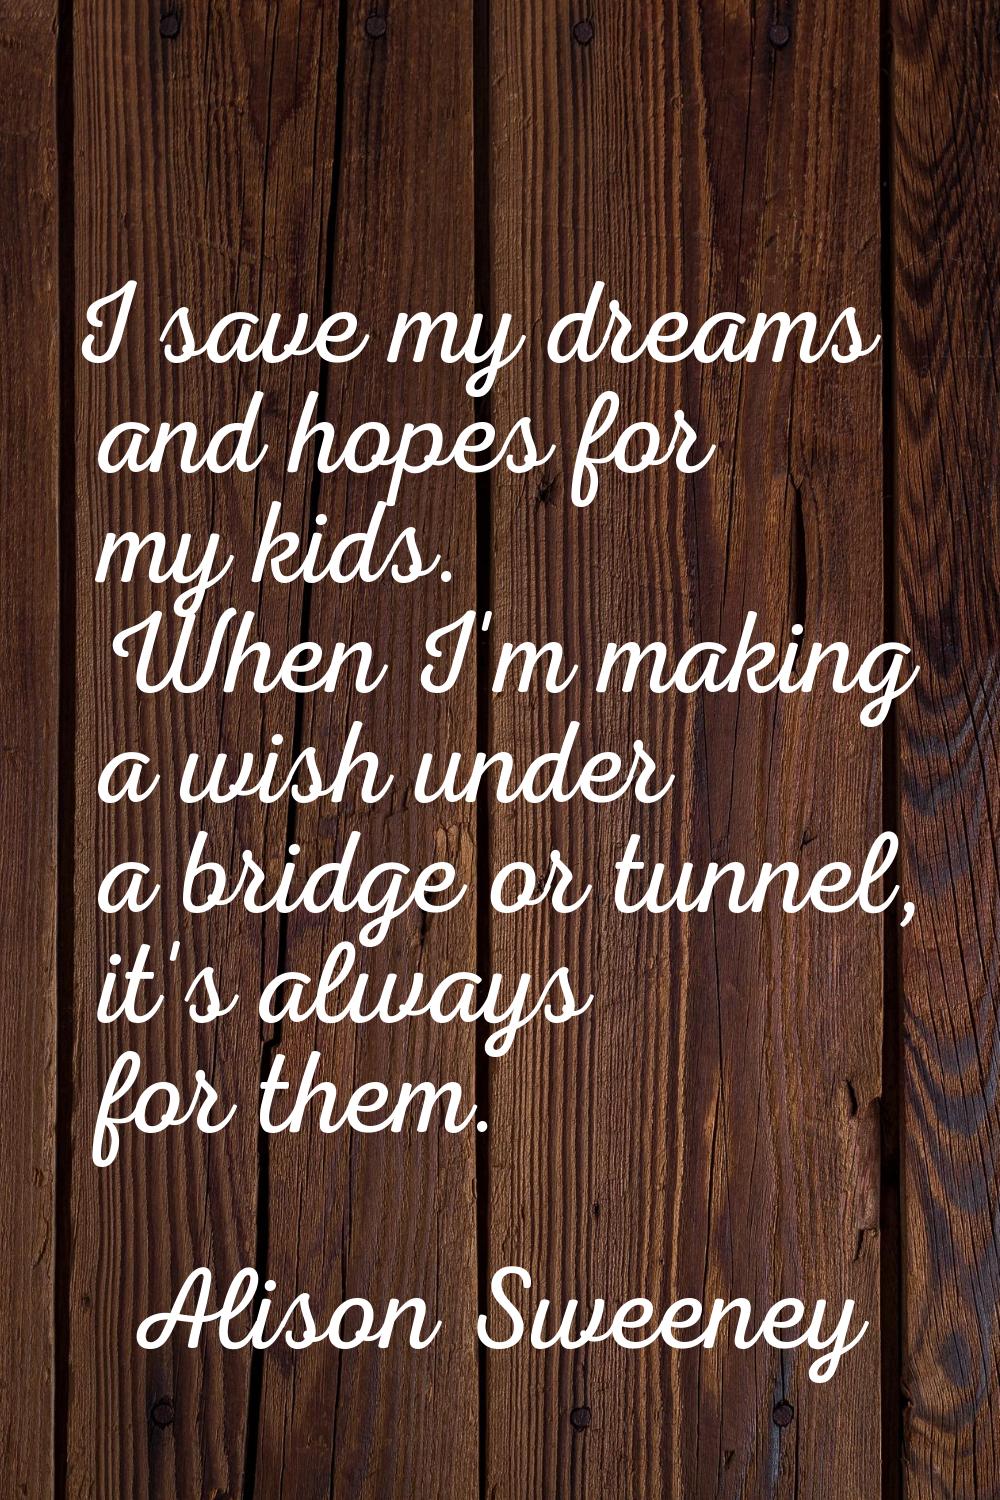 I save my dreams and hopes for my kids. When I'm making a wish under a bridge or tunnel, it's alway